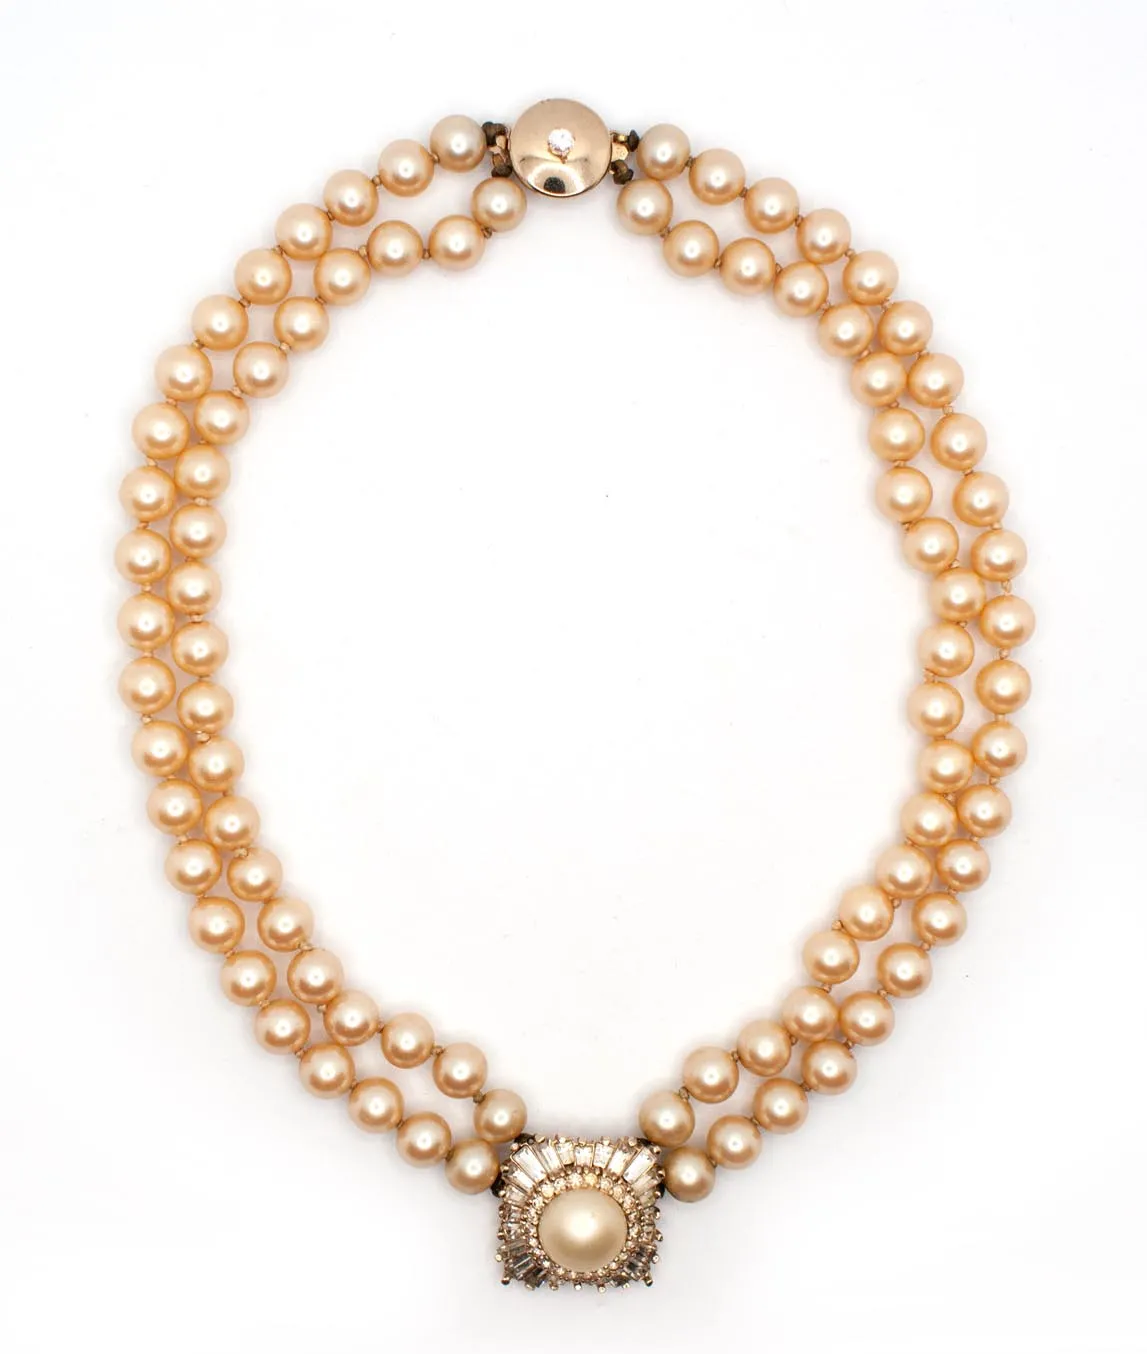 Top view of Panetta double strand faux pearl necklace with champagne beads and central pendant and push clasp